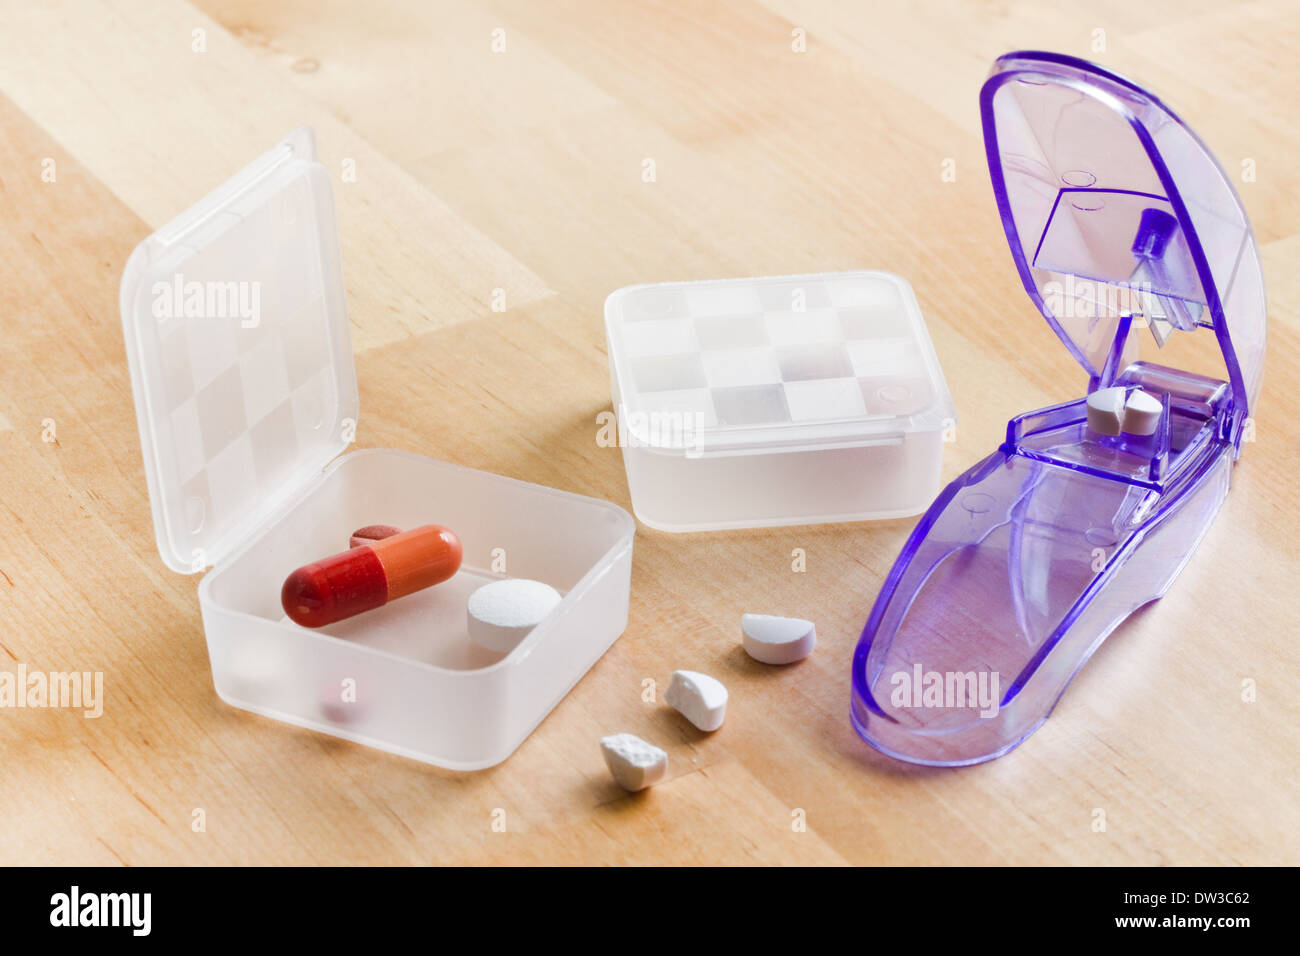 Health care - Sorting out daily medication in pillboxes using pillcutter Stock Photo